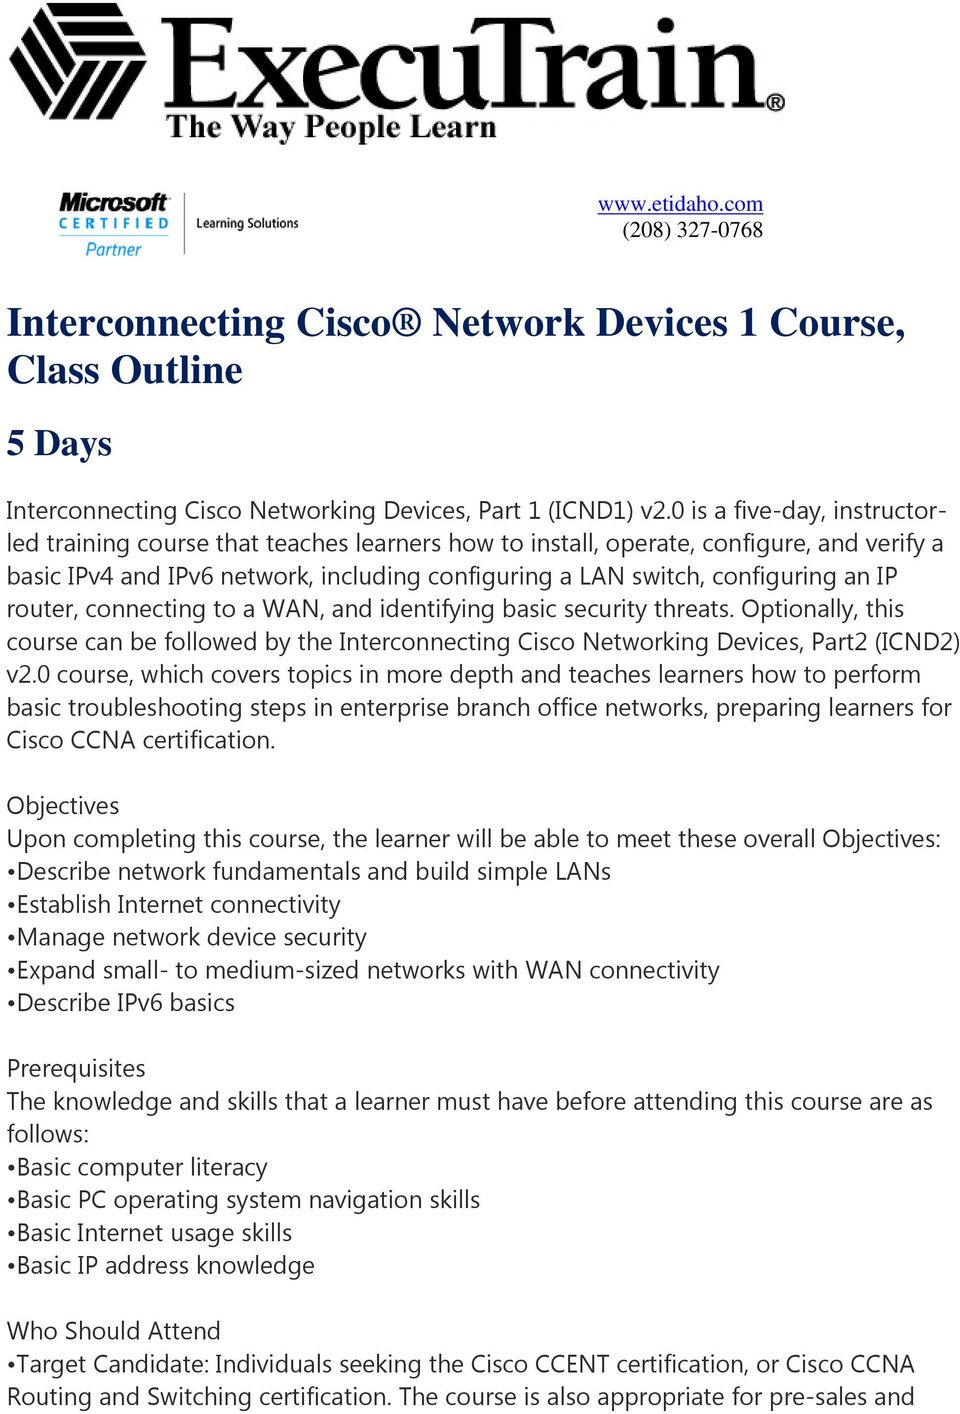 IP router, connecting to a WAN, and identifying basic security threats. Optionally, this course can be followed by the Interconnecting Cisco Networking Devices, Part2 (ICND2) v2.